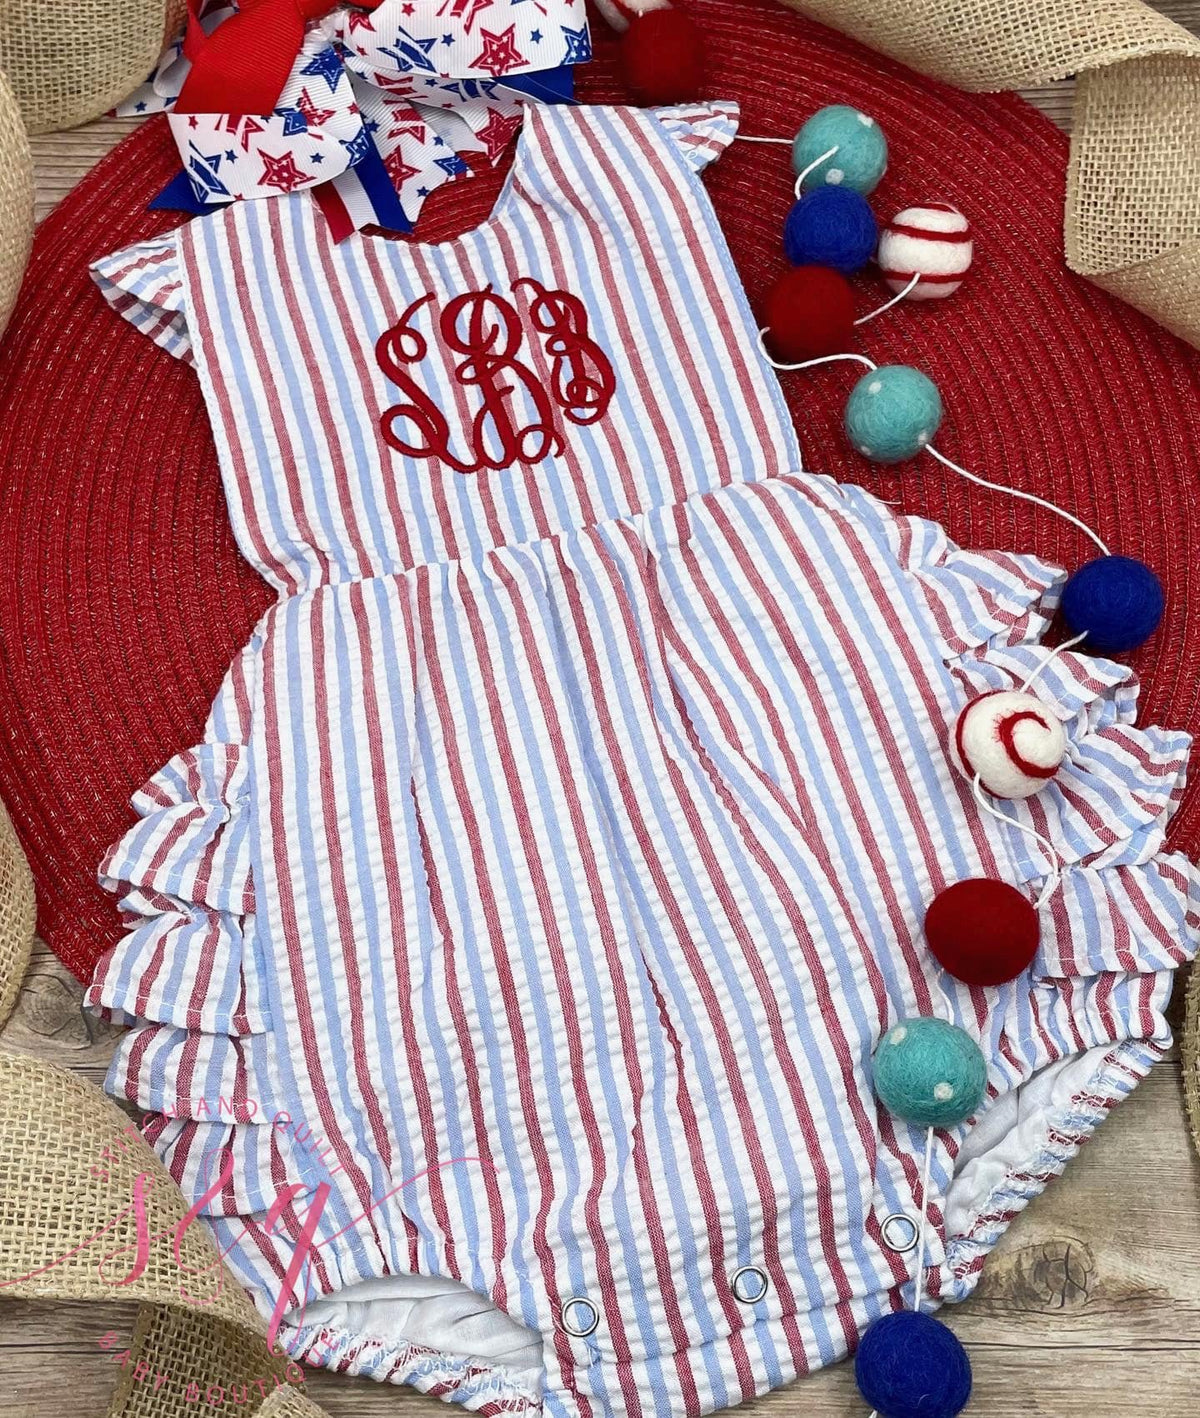 Red, White and Blue Seersucker Girls Ruffle Sunsuit for Summer Fun and 4th of July Celebrations, Toddler 4th Of July, Infant Patriotic